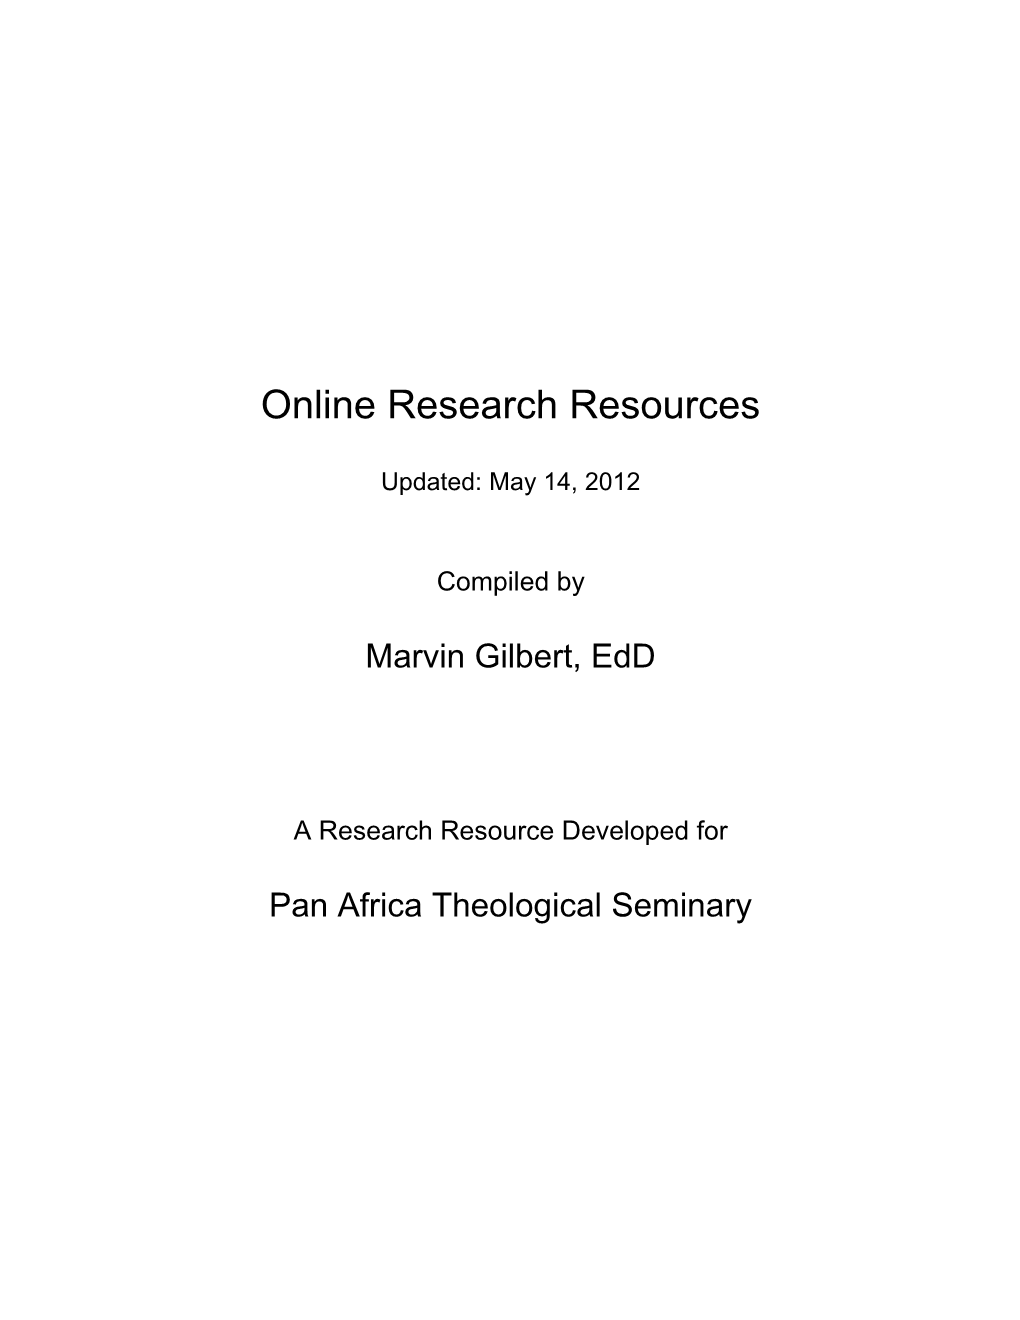 Online Research Resources Updated 28 Oct 2013 Page 1 of 27